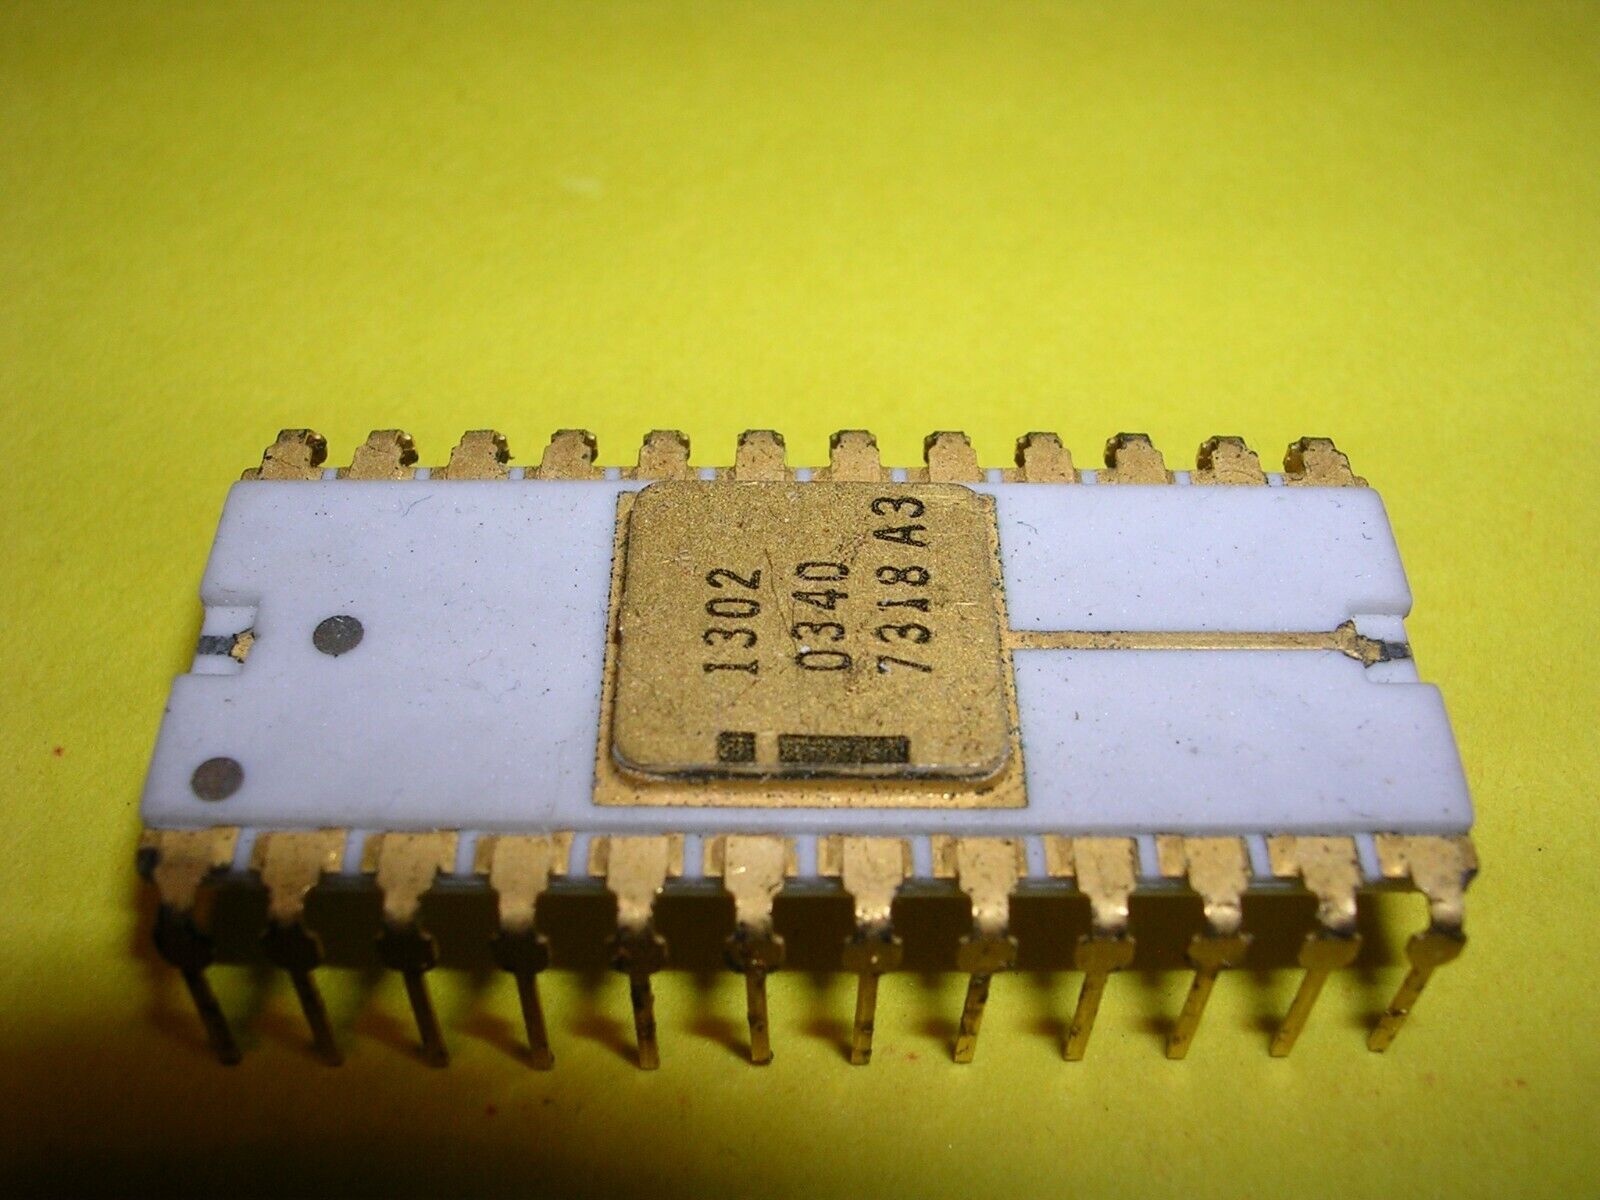 Intel 1302 (C1302) in White Ceramic Package - Extremely Rare